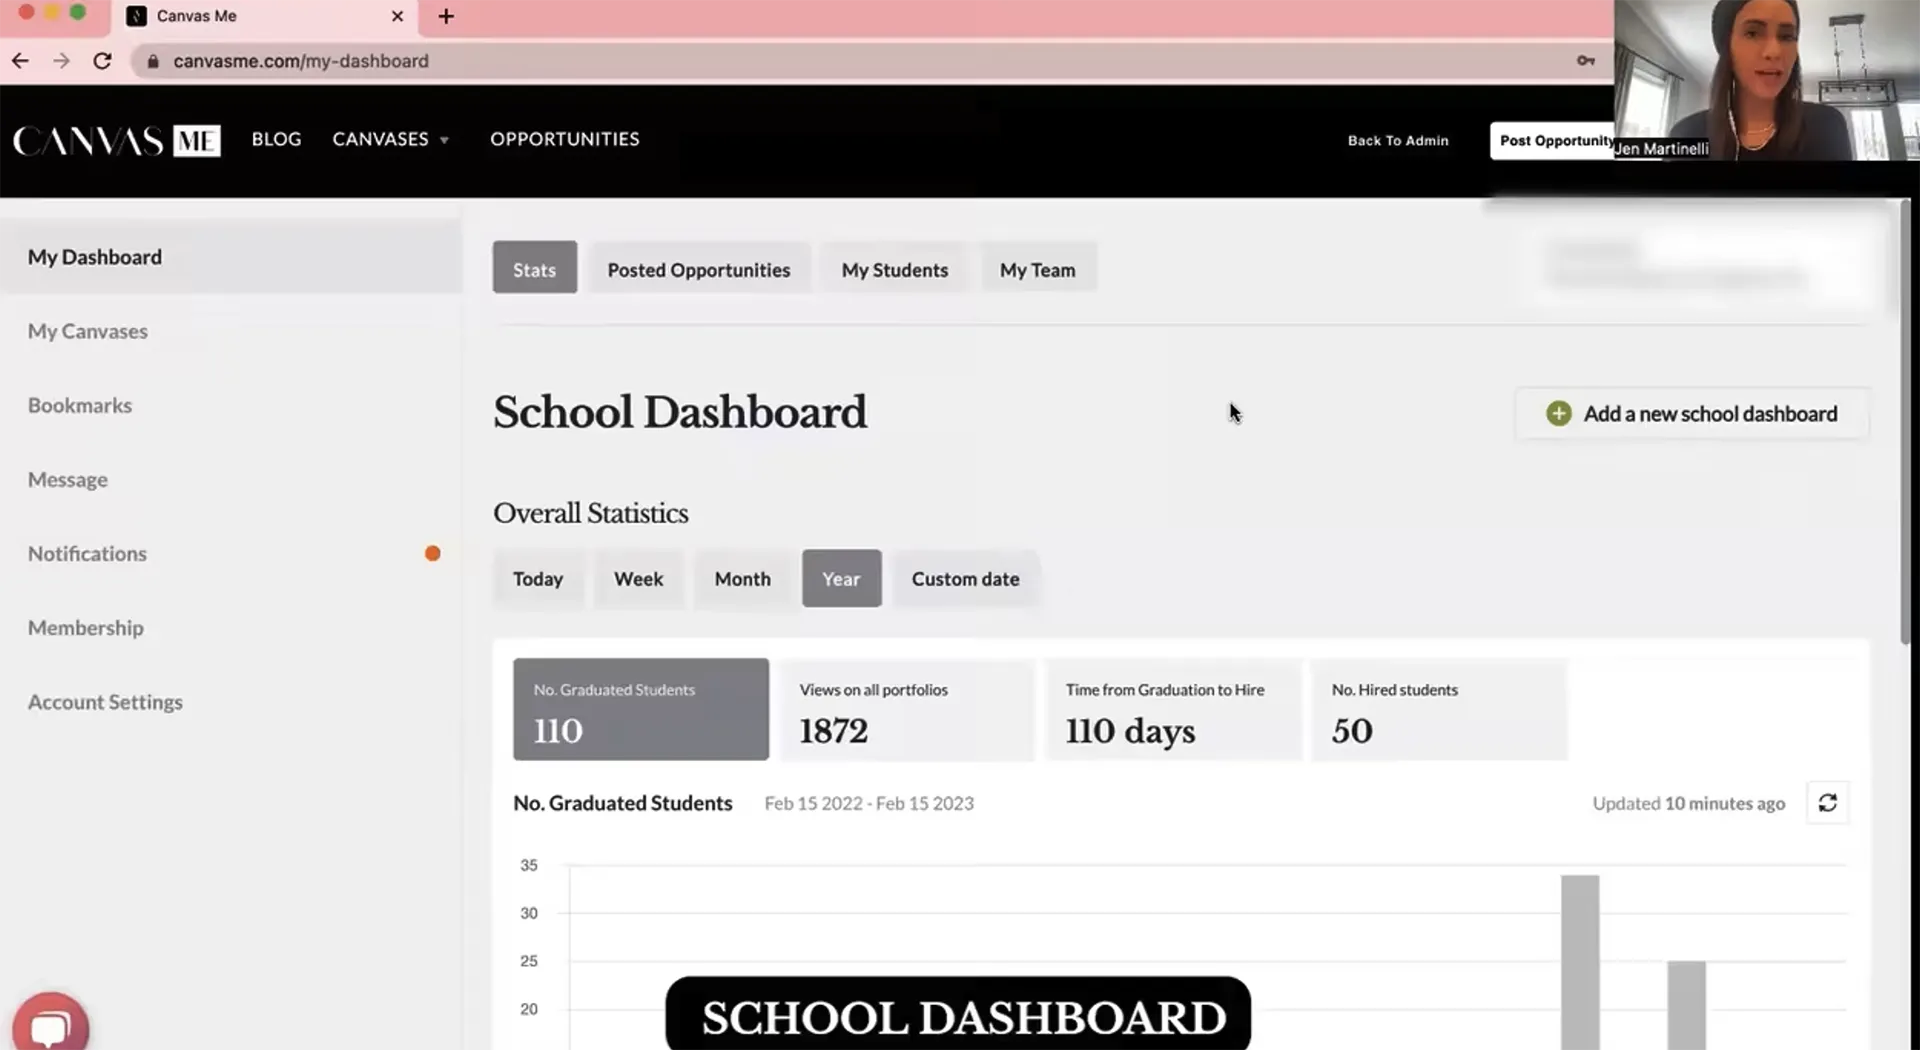 Introducing the Canvas ME School Dashboard